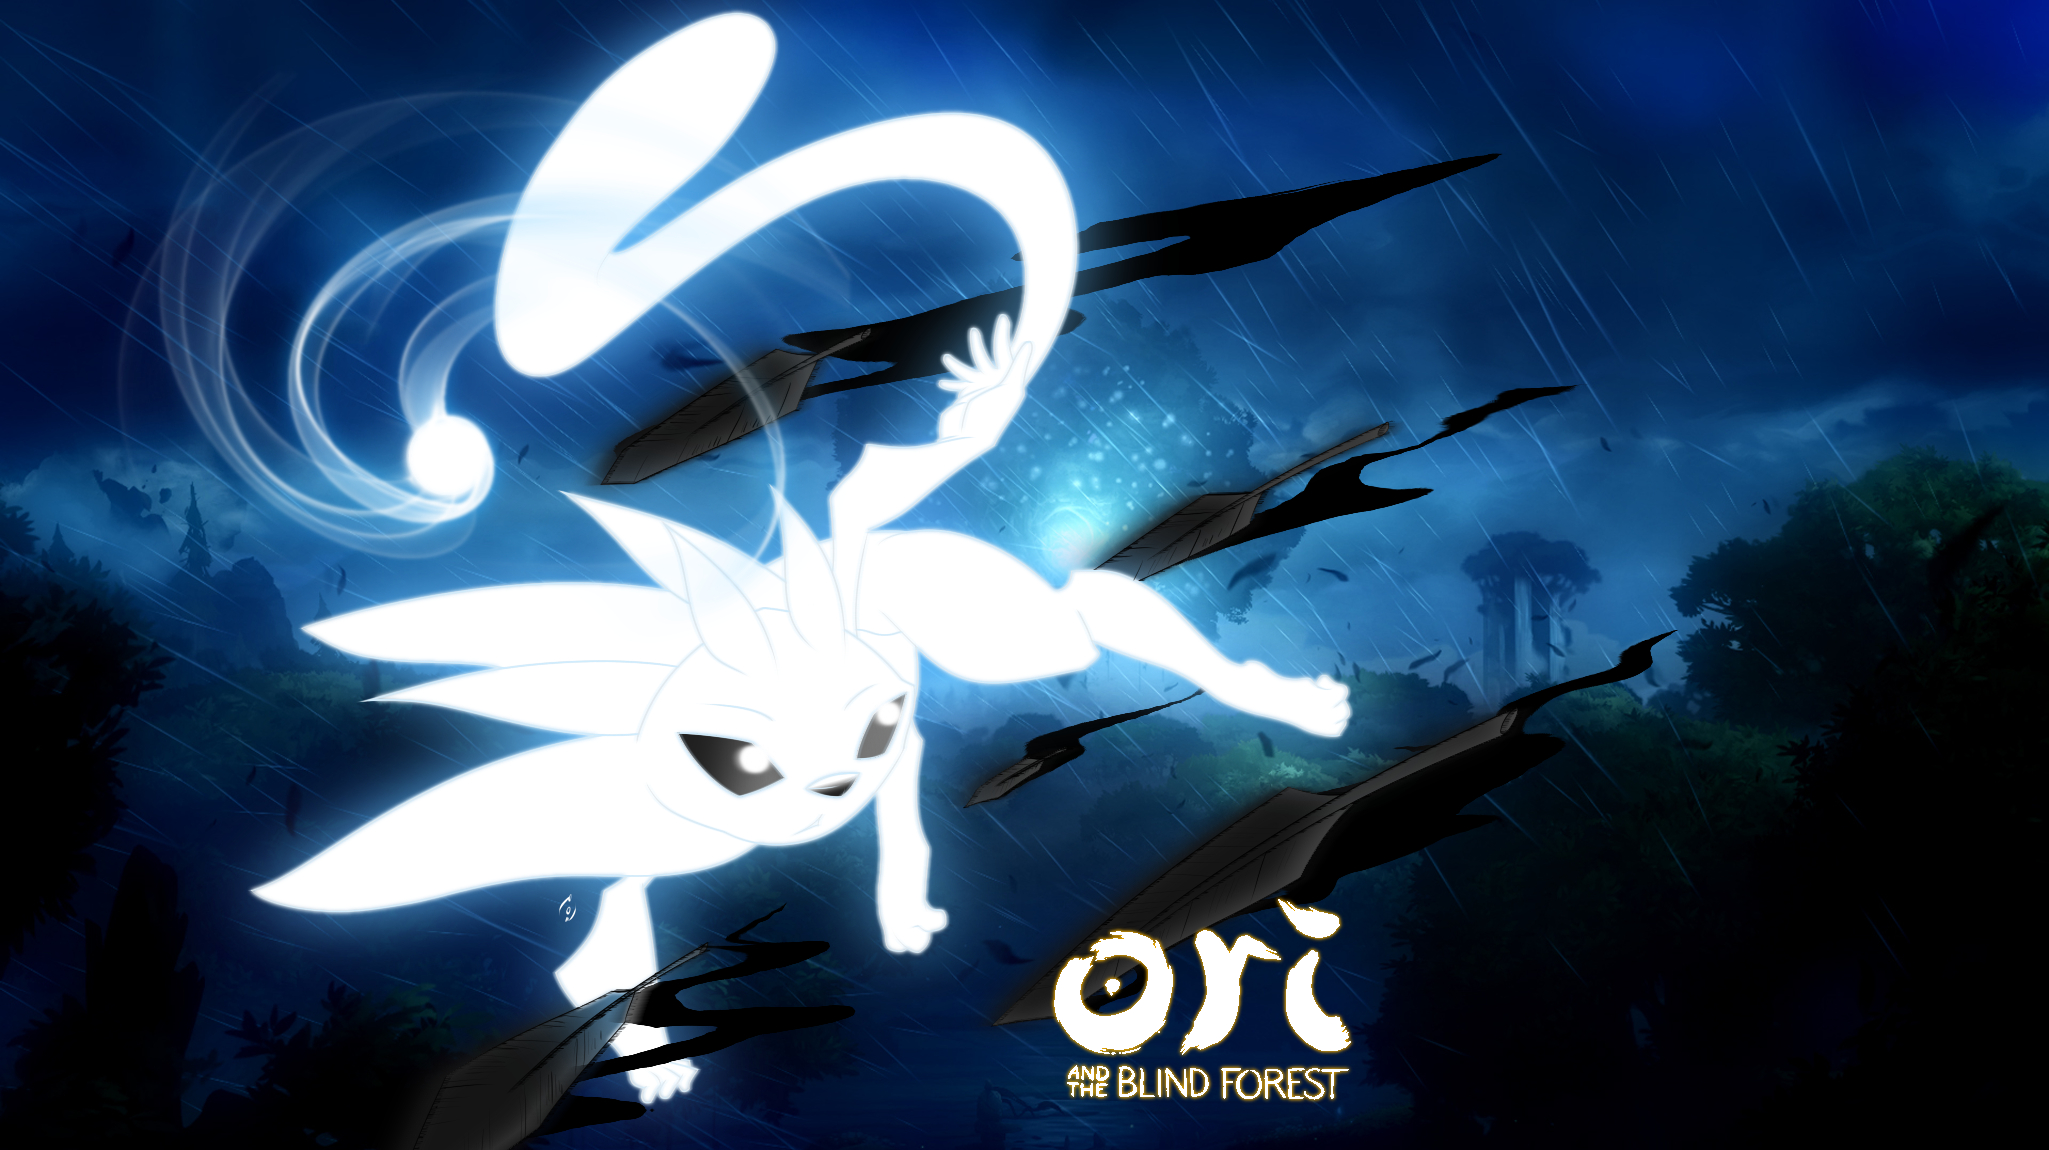 2049x1150 Ori and the Blind Forest by Akaonic on | Forest wallpaper, Adventure rpg, Wallpaper